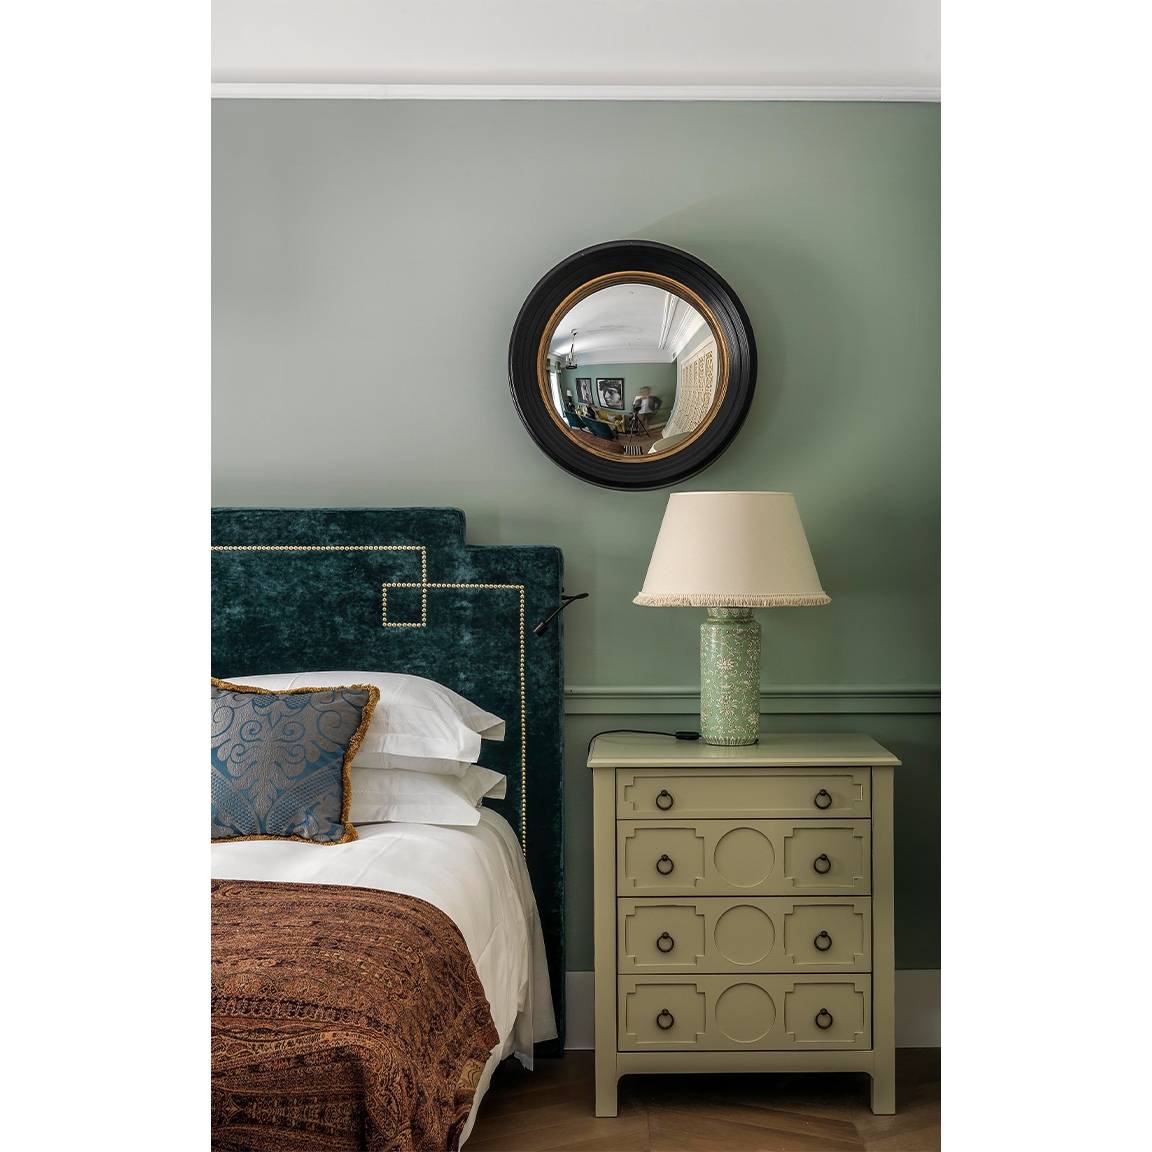 rounded mirror over a bed with bedside table